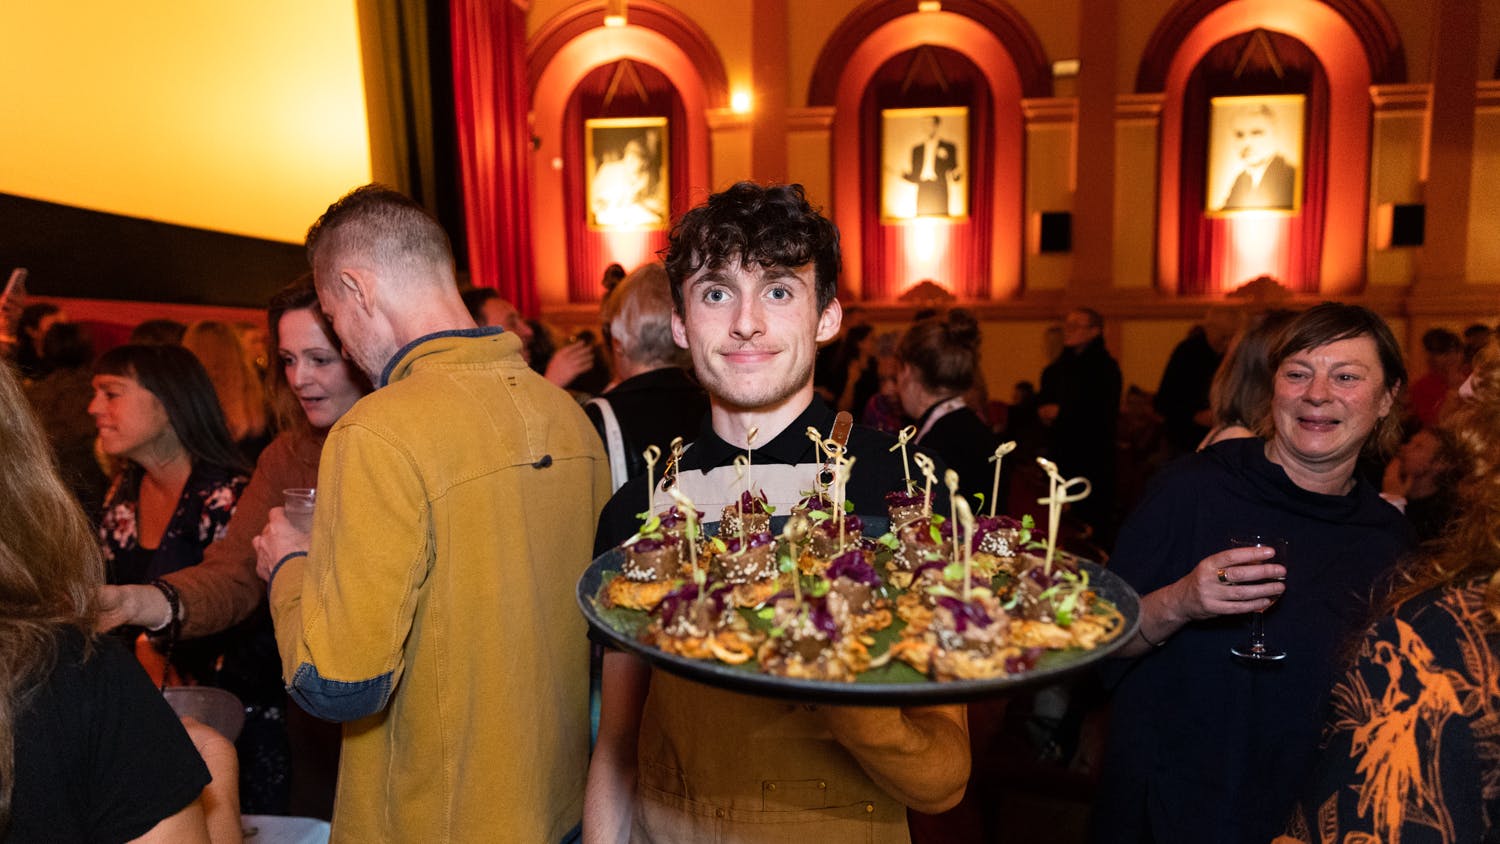 Waiter with food at Folkestone silver screen cinema event